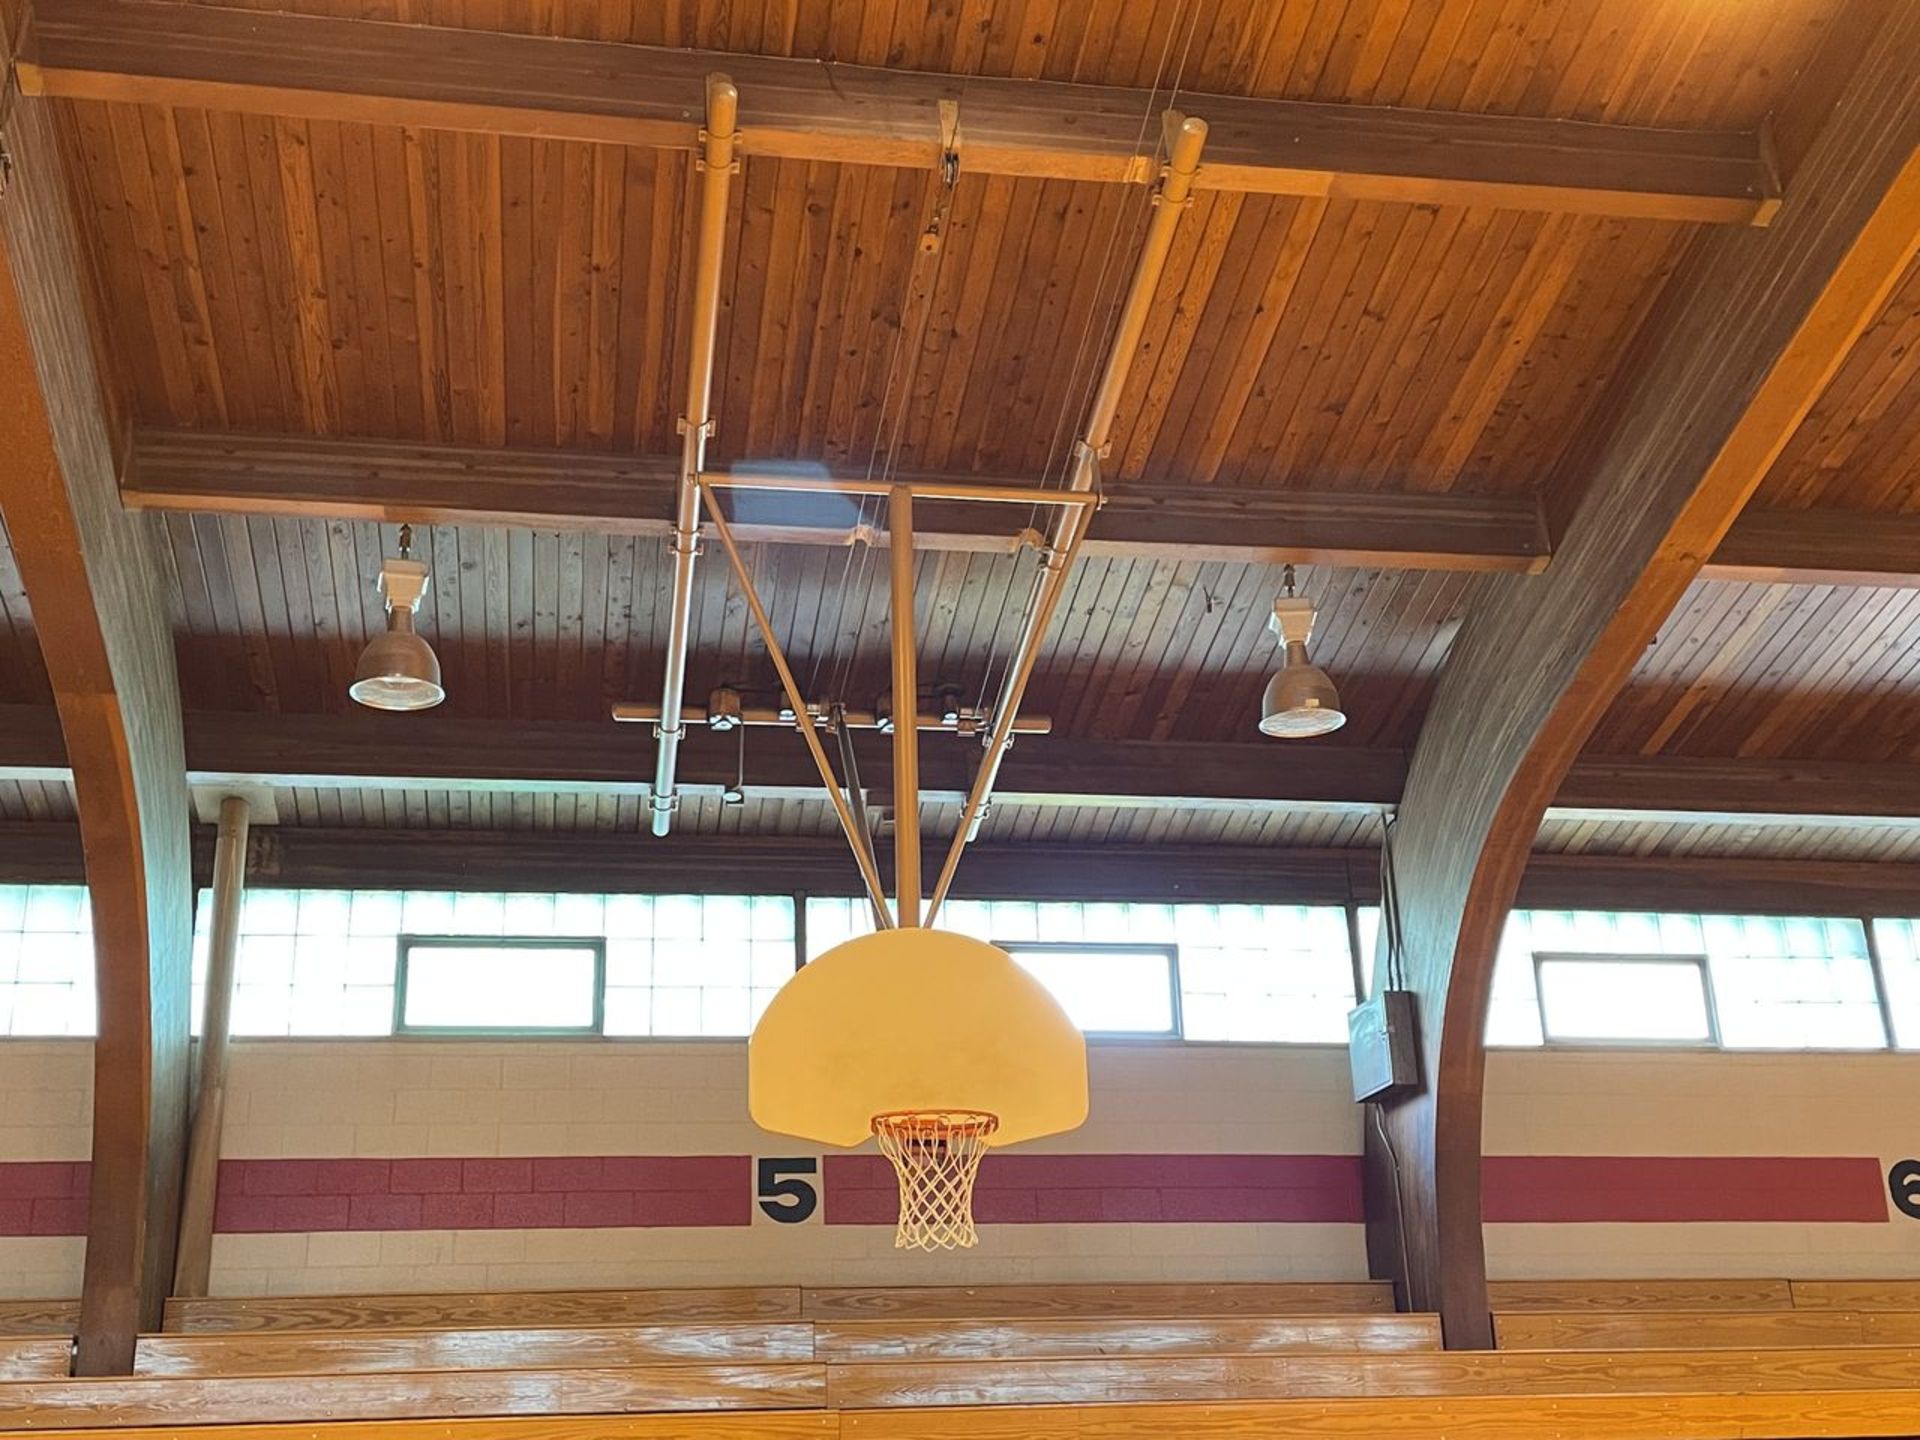 Lot - (2) Wood Backboards with Rim and Net, Ceiling Mounted (Gym) - Image 2 of 2